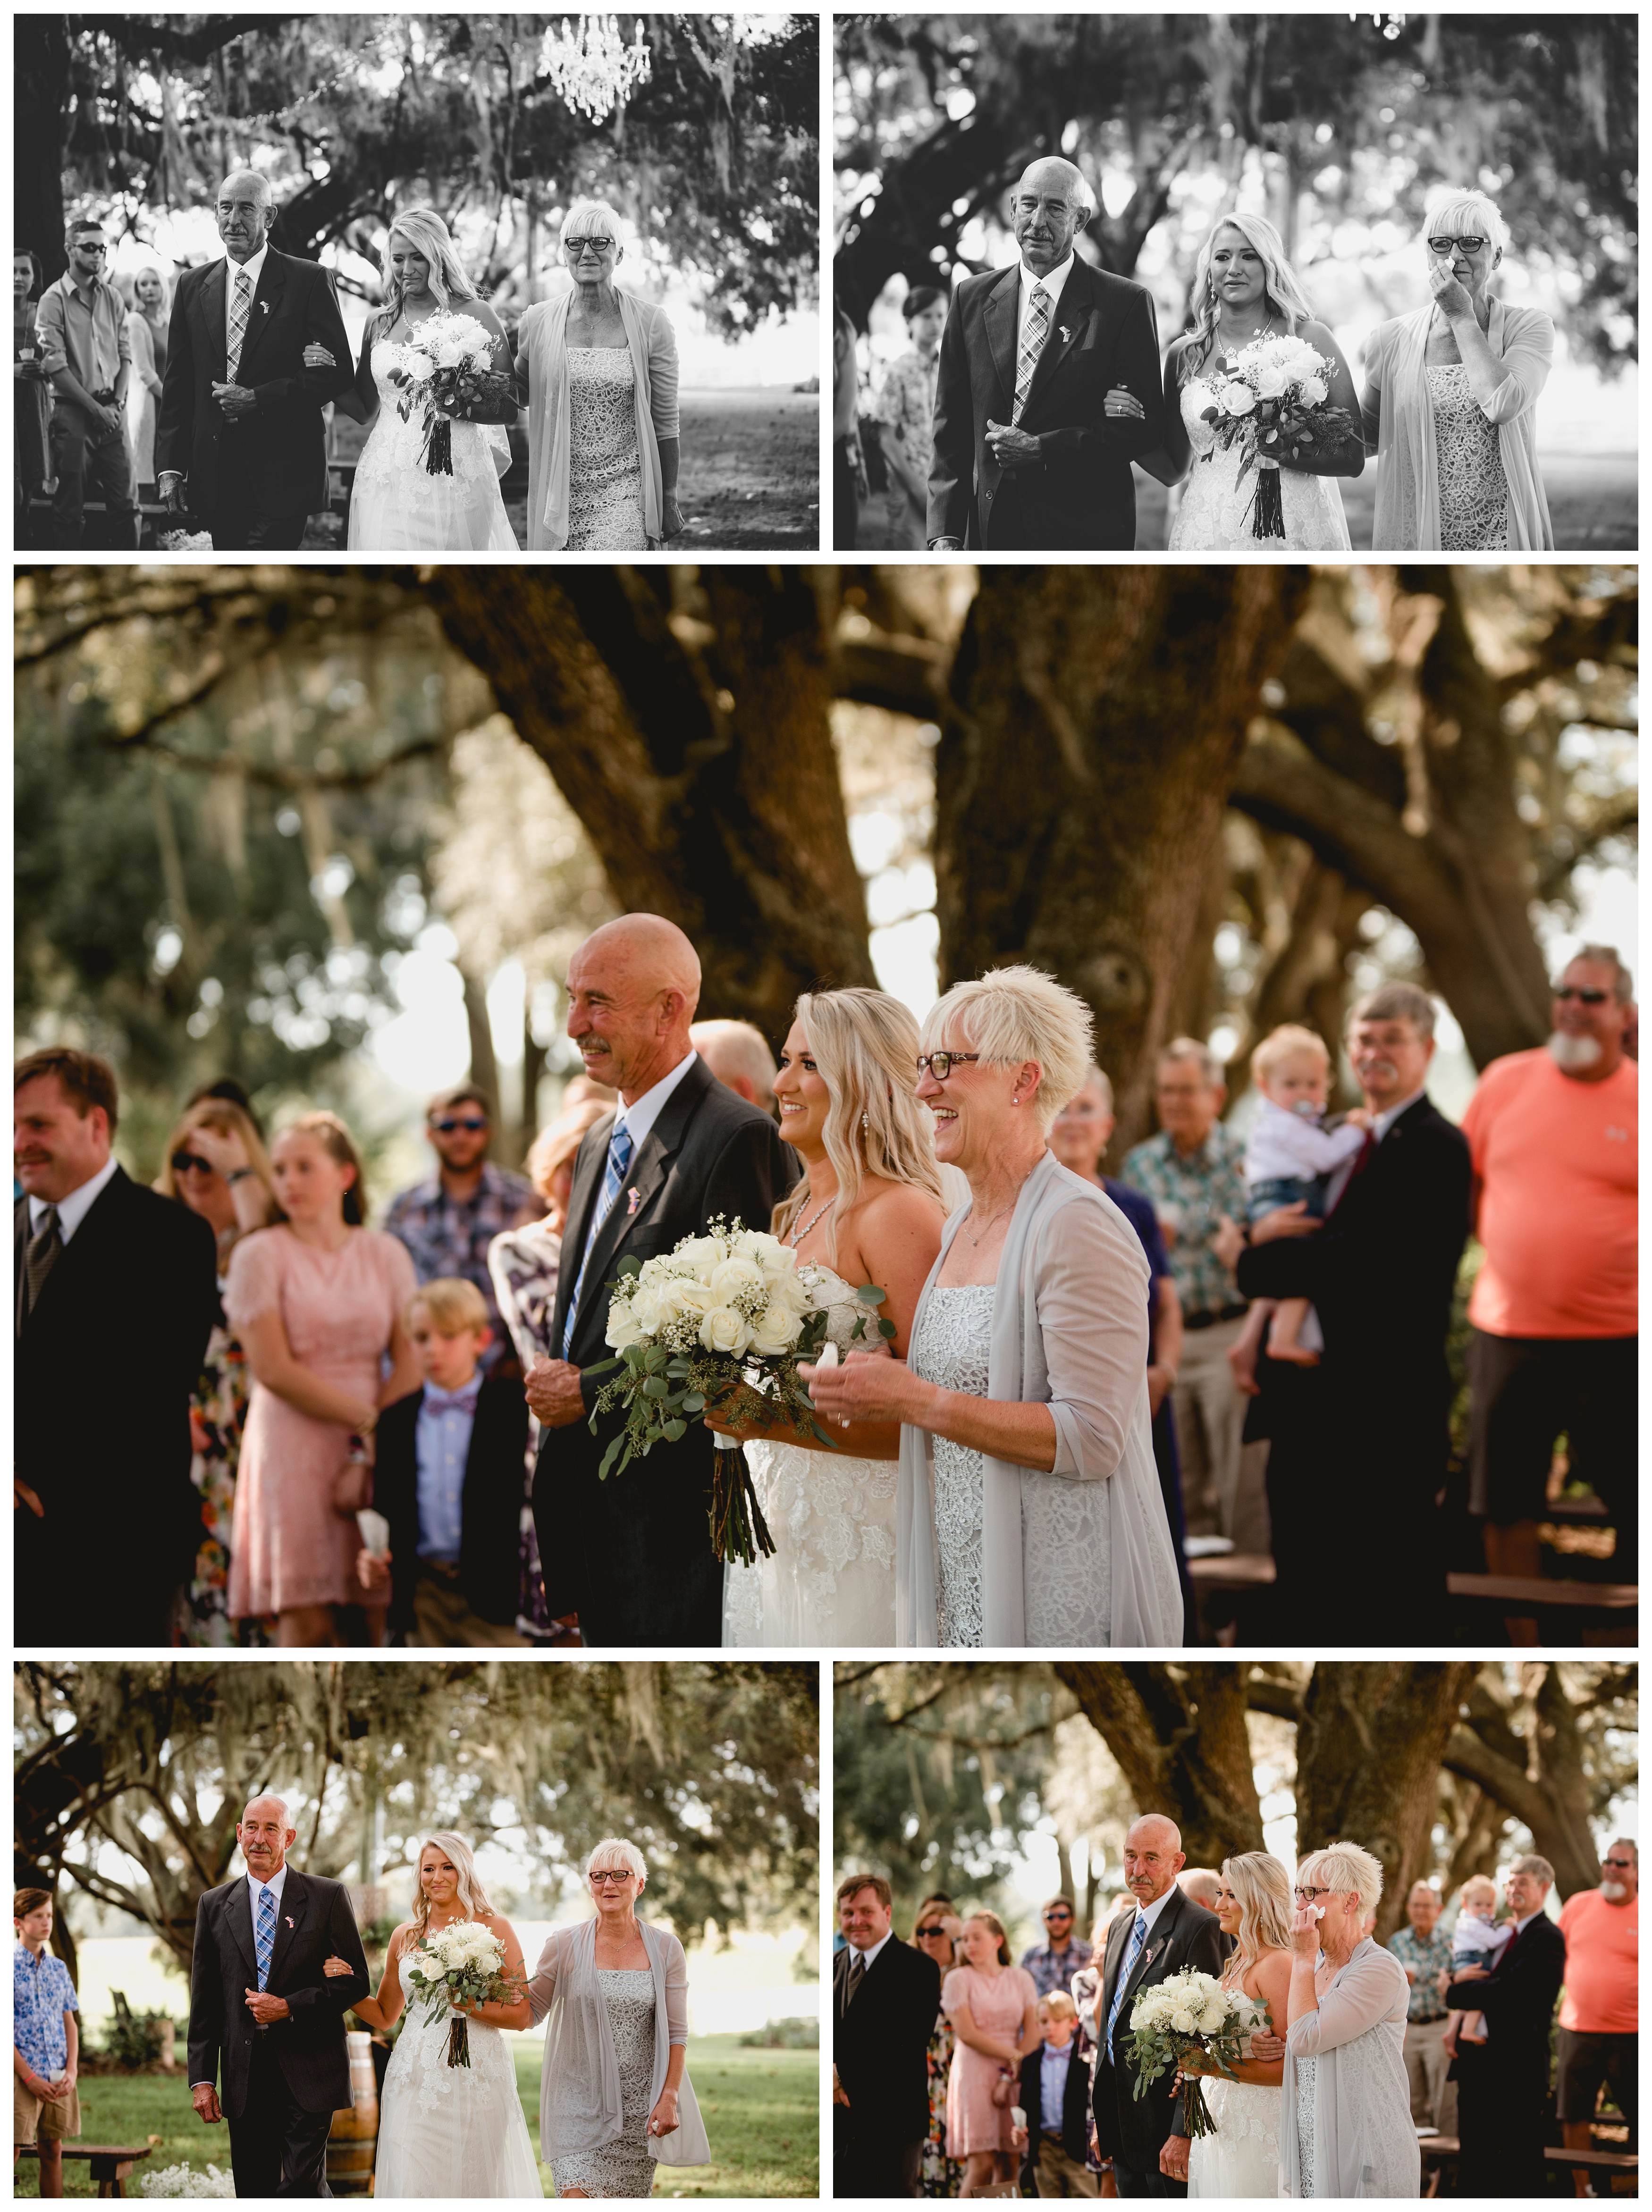 Wedding ceremony photography in North Florida. Travels to Tallahassee and Gainesville. Shelly Williams Photography